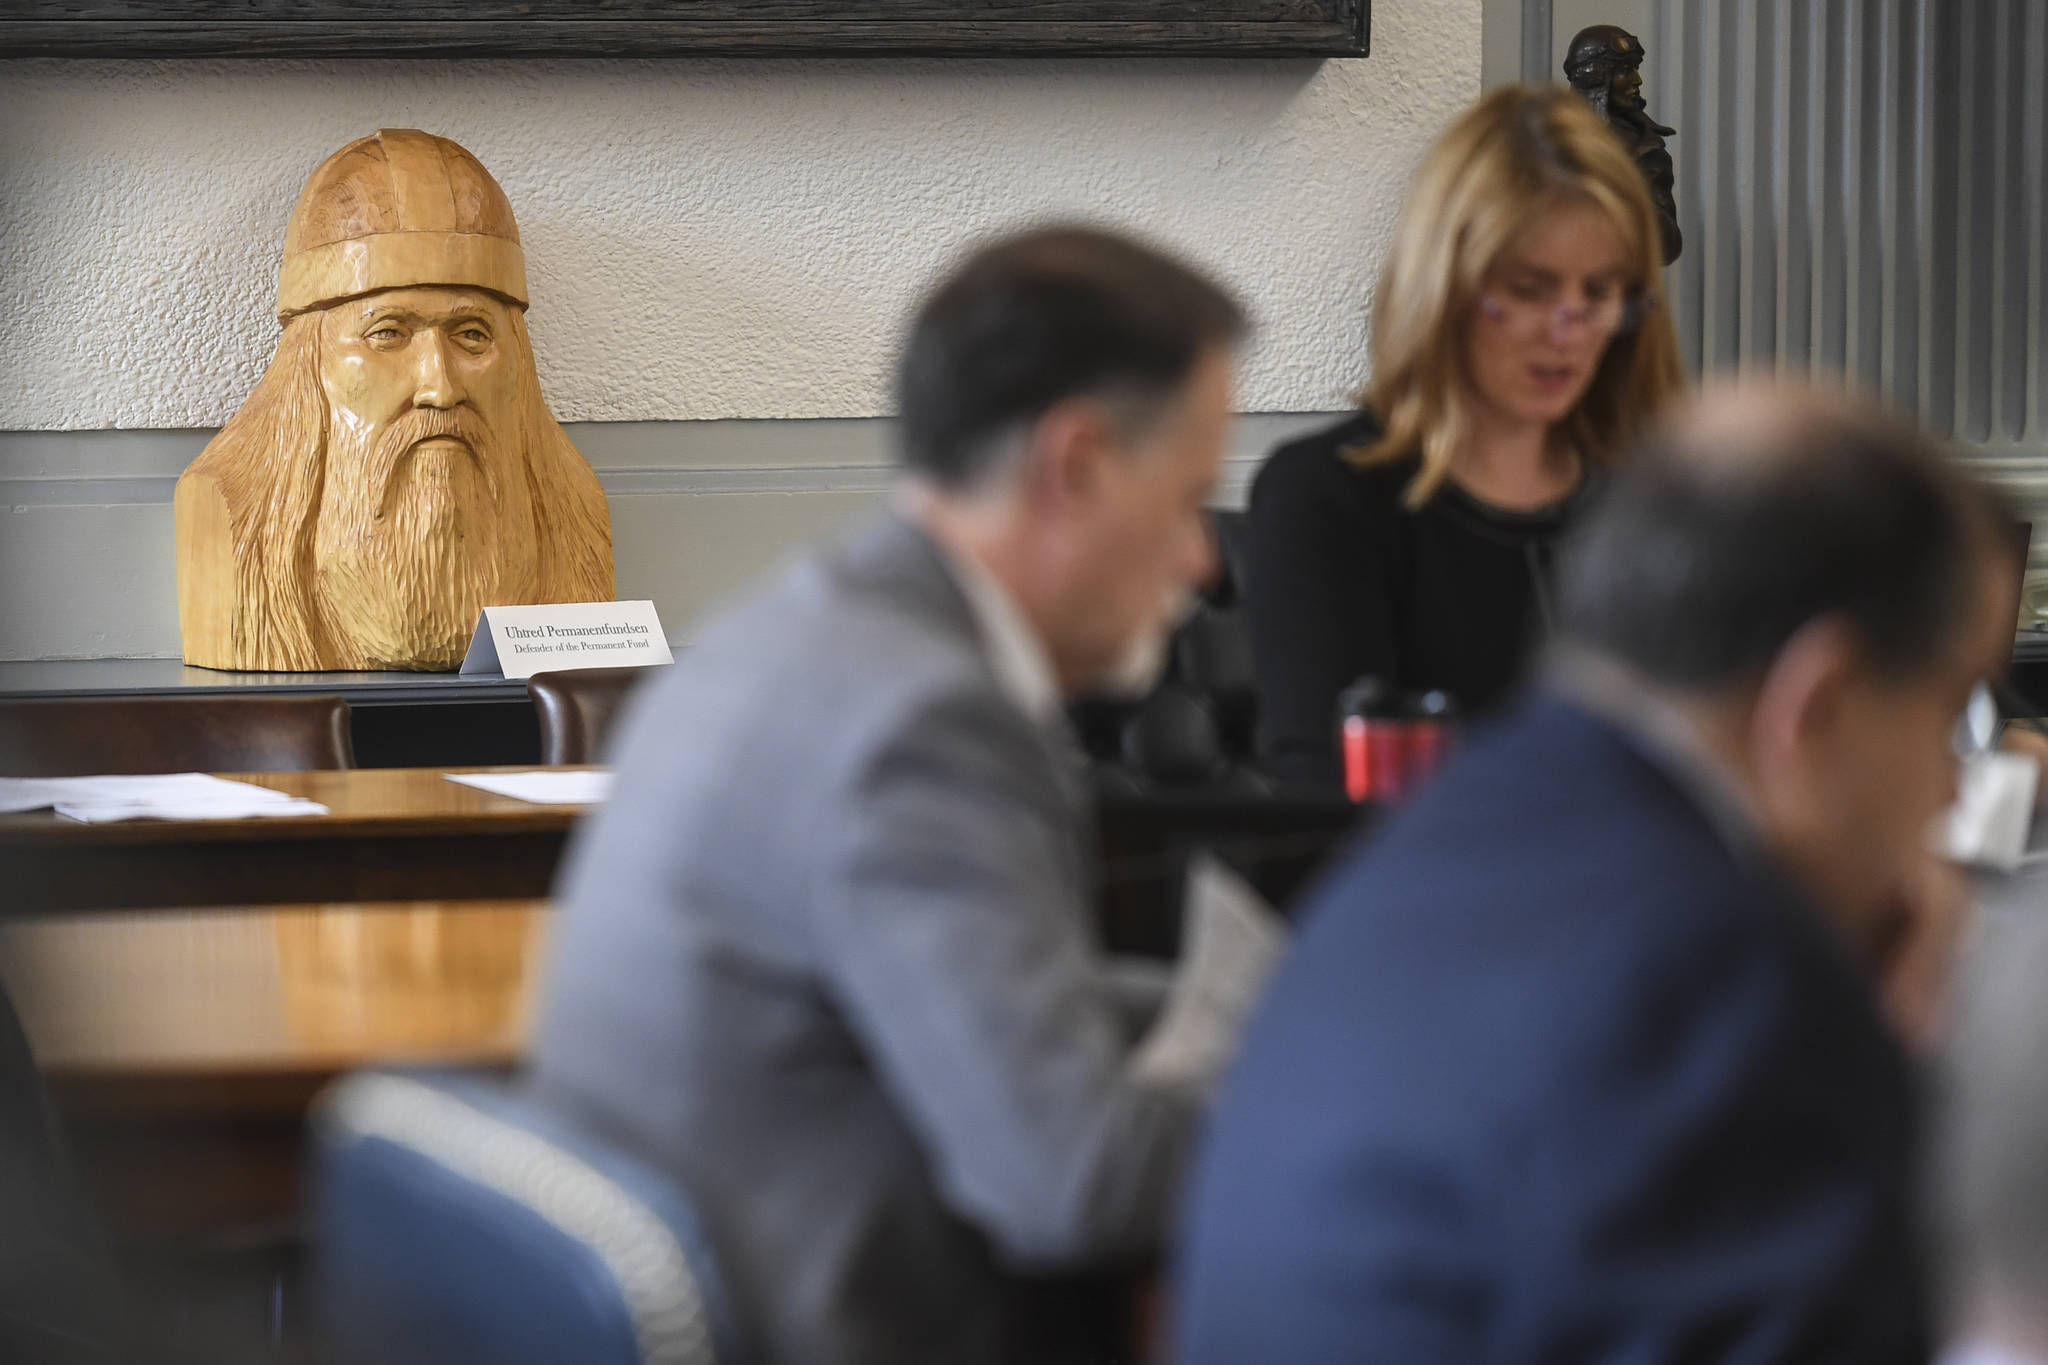 A carved statue titled “Uhtred Permanentfundsen, Defender of the Permanent Fund,” sits on the counter as Sen. Natasha von Imhof, R-Anchorage, chairs the Senate Finance Committee at the Capitol on Monday, May 6, 2019. Co-Chair Bert Stedman, R-Sitka, bought the carving from Petersburg artist Robert Fudge recently and stationed it at the front of the Senate Finance Committee room. (Michael Penn | Juneau Empire File)